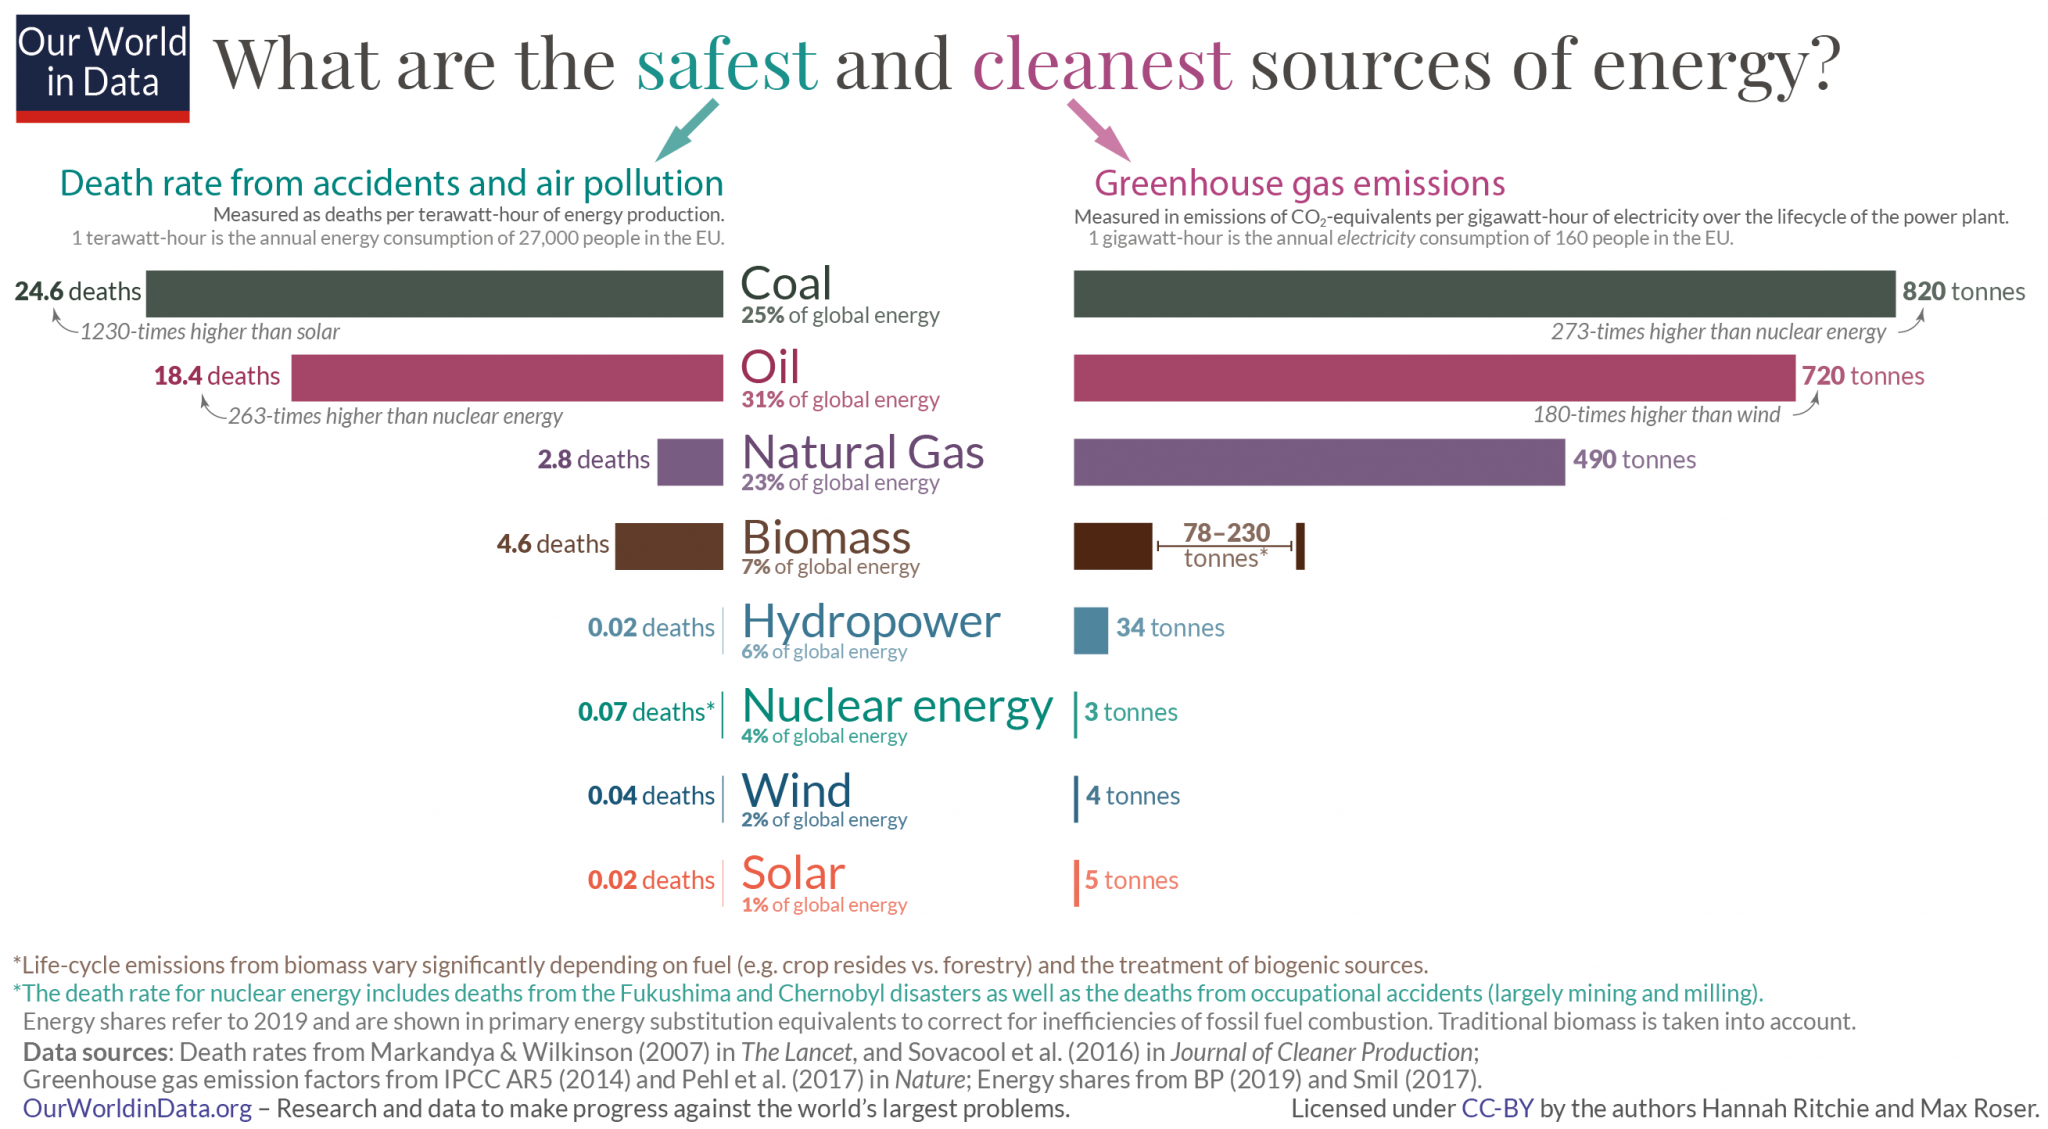 Bar graph comparing deaths and greenhouse gas emissions for coal, oil, natural gas, biomass, hydropower, nuclear, solar, and wind energy